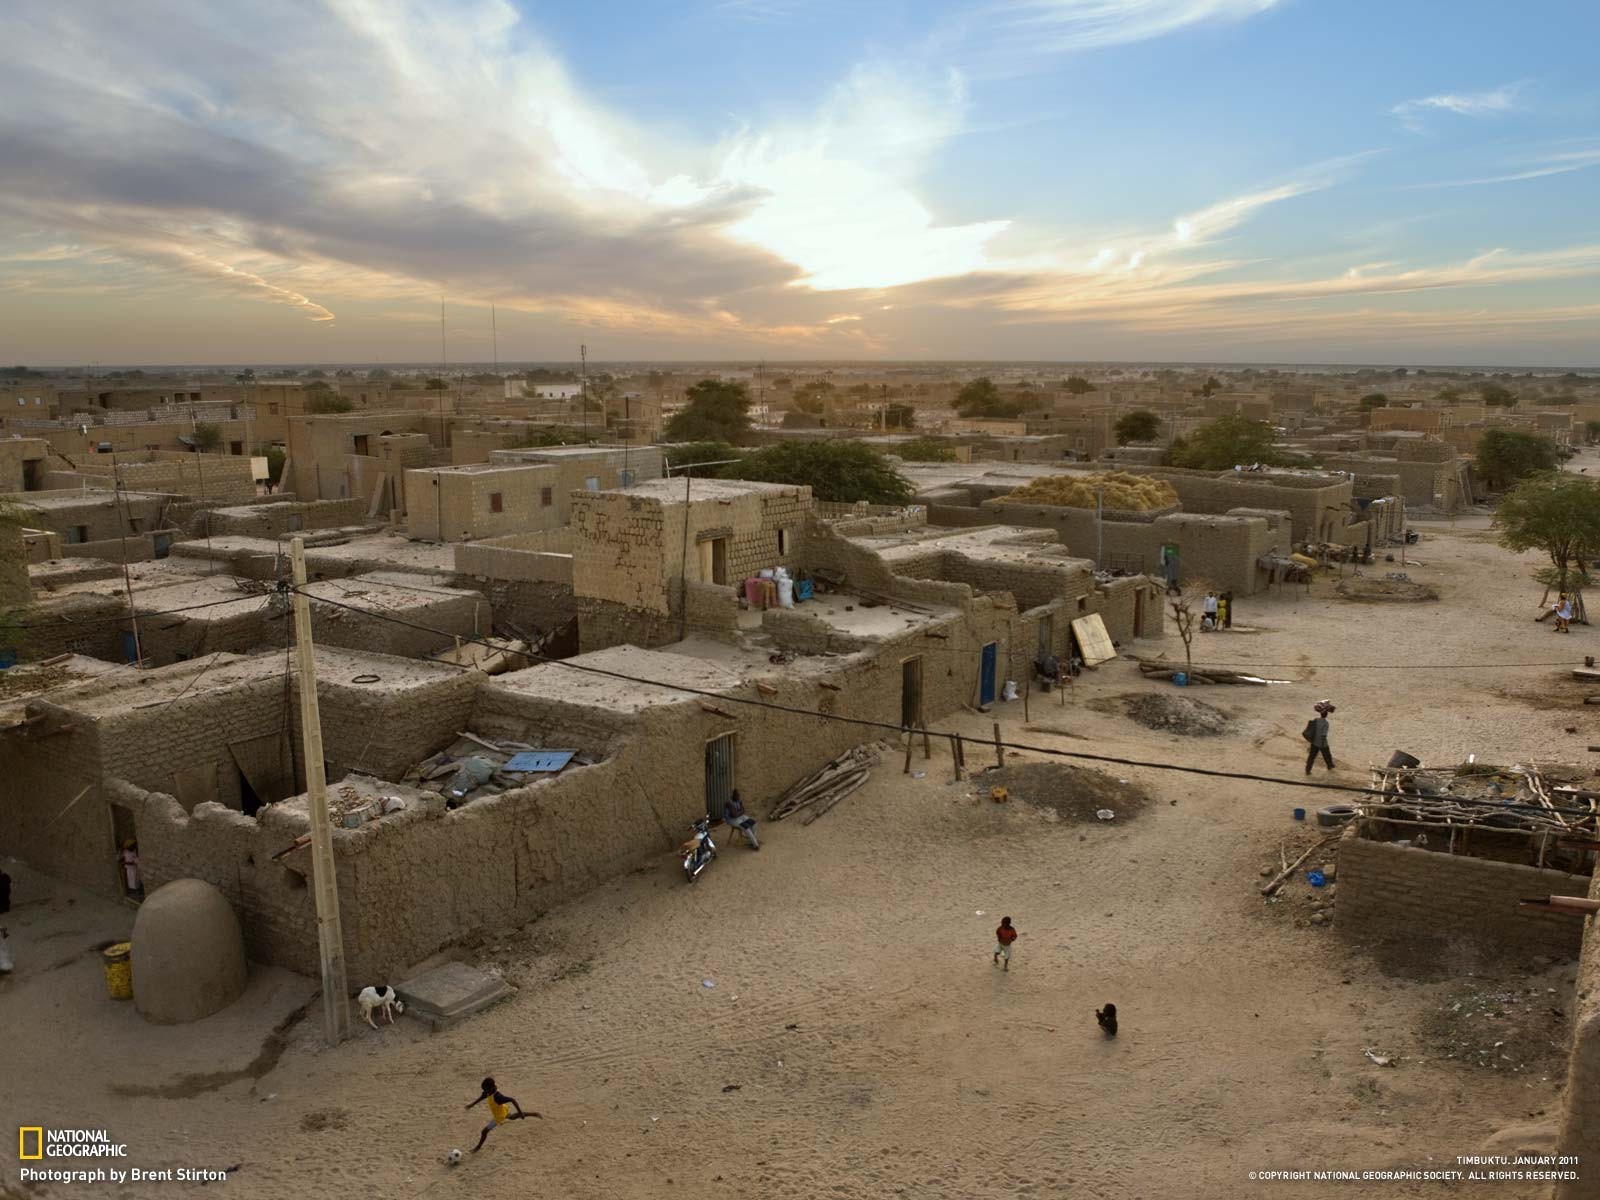 General 1600x1200 National Geographic Timbuktu children city Africa